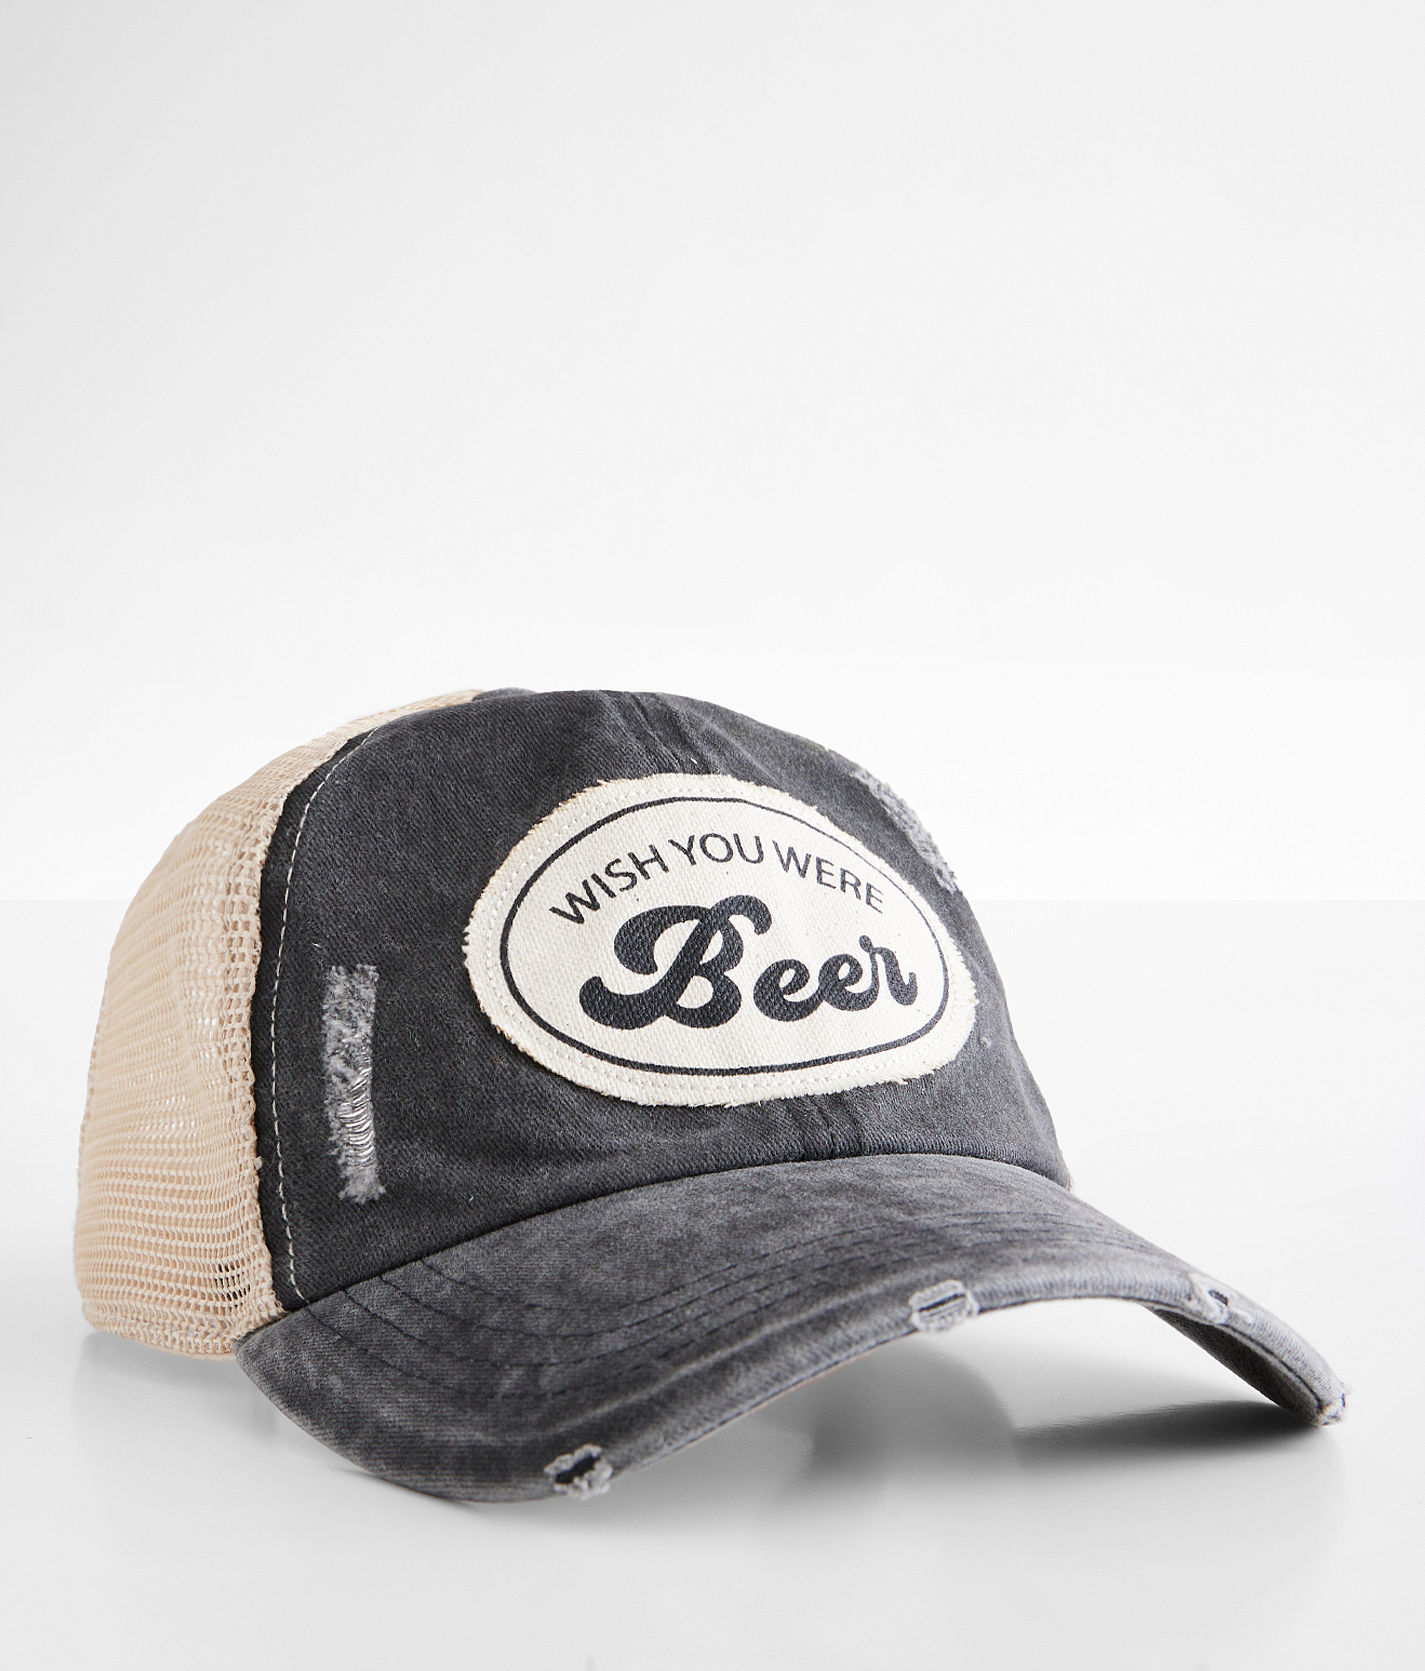 Wish You Were Beer Baseball Hat - Women's Hats in Charcoal